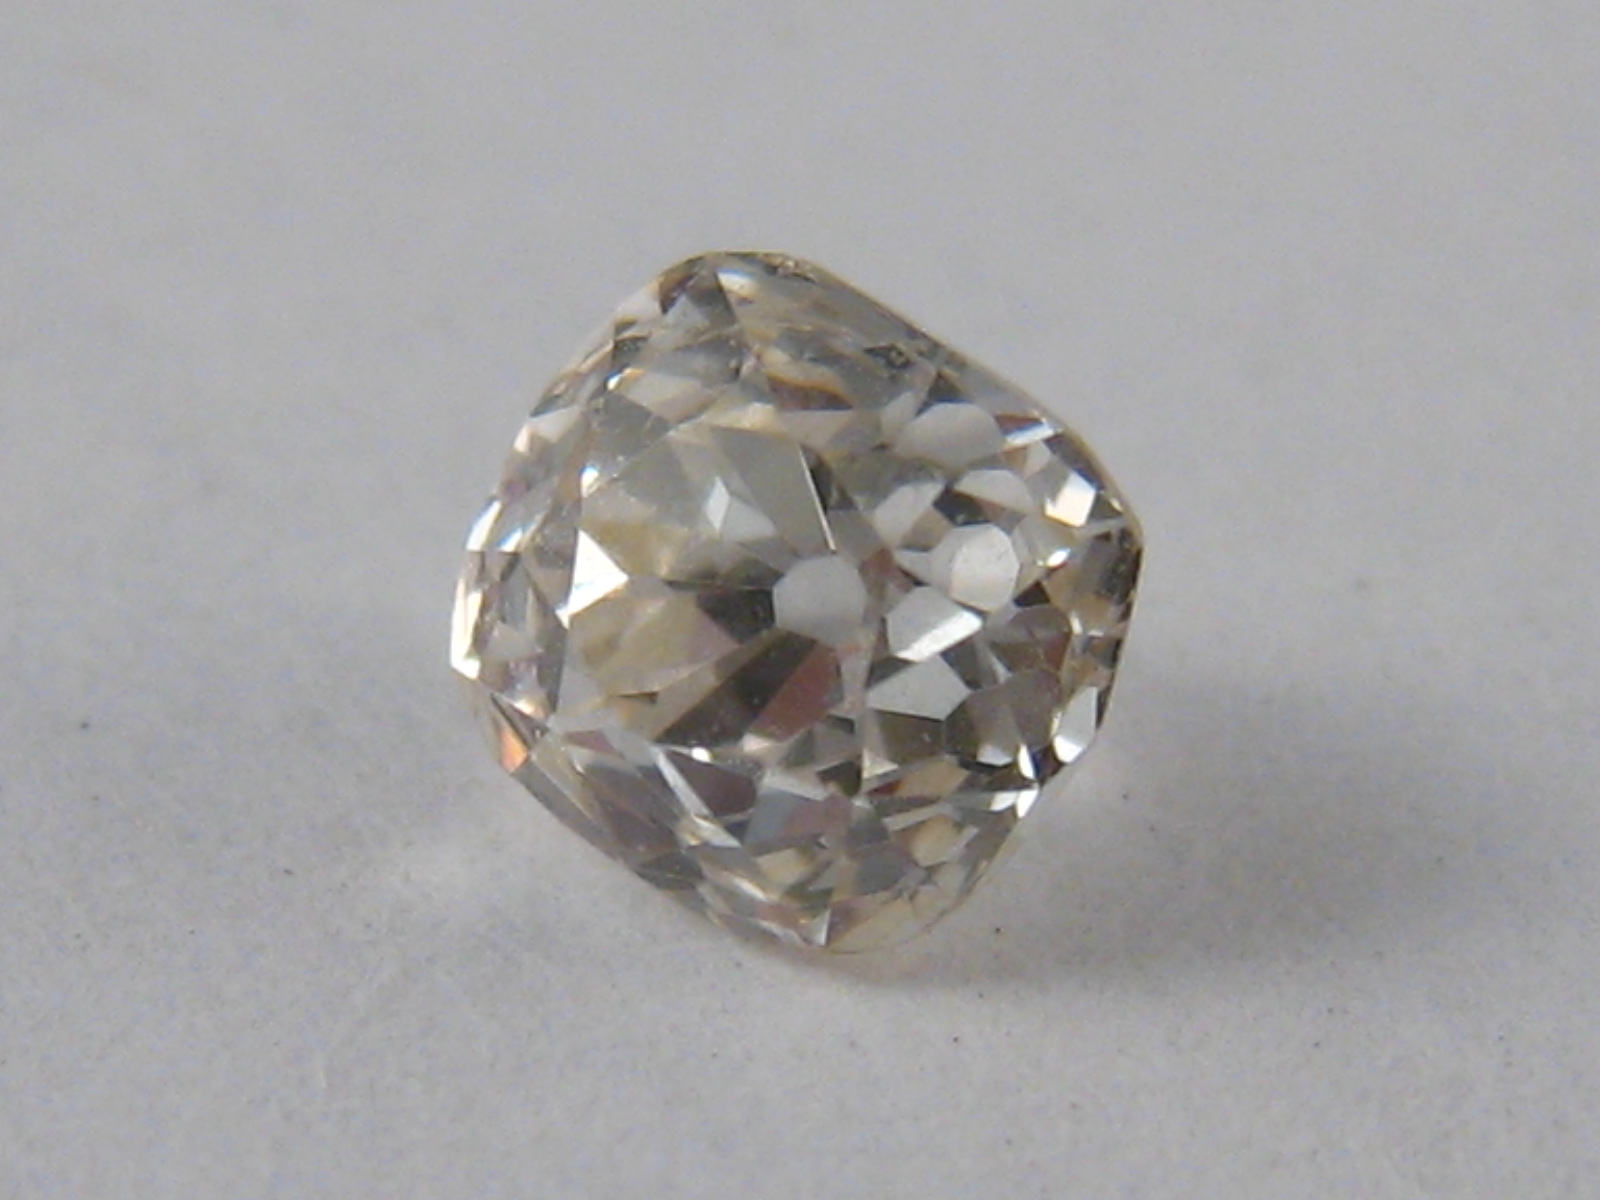 A loose polished round briliant cut diamond, weight approx. 0.